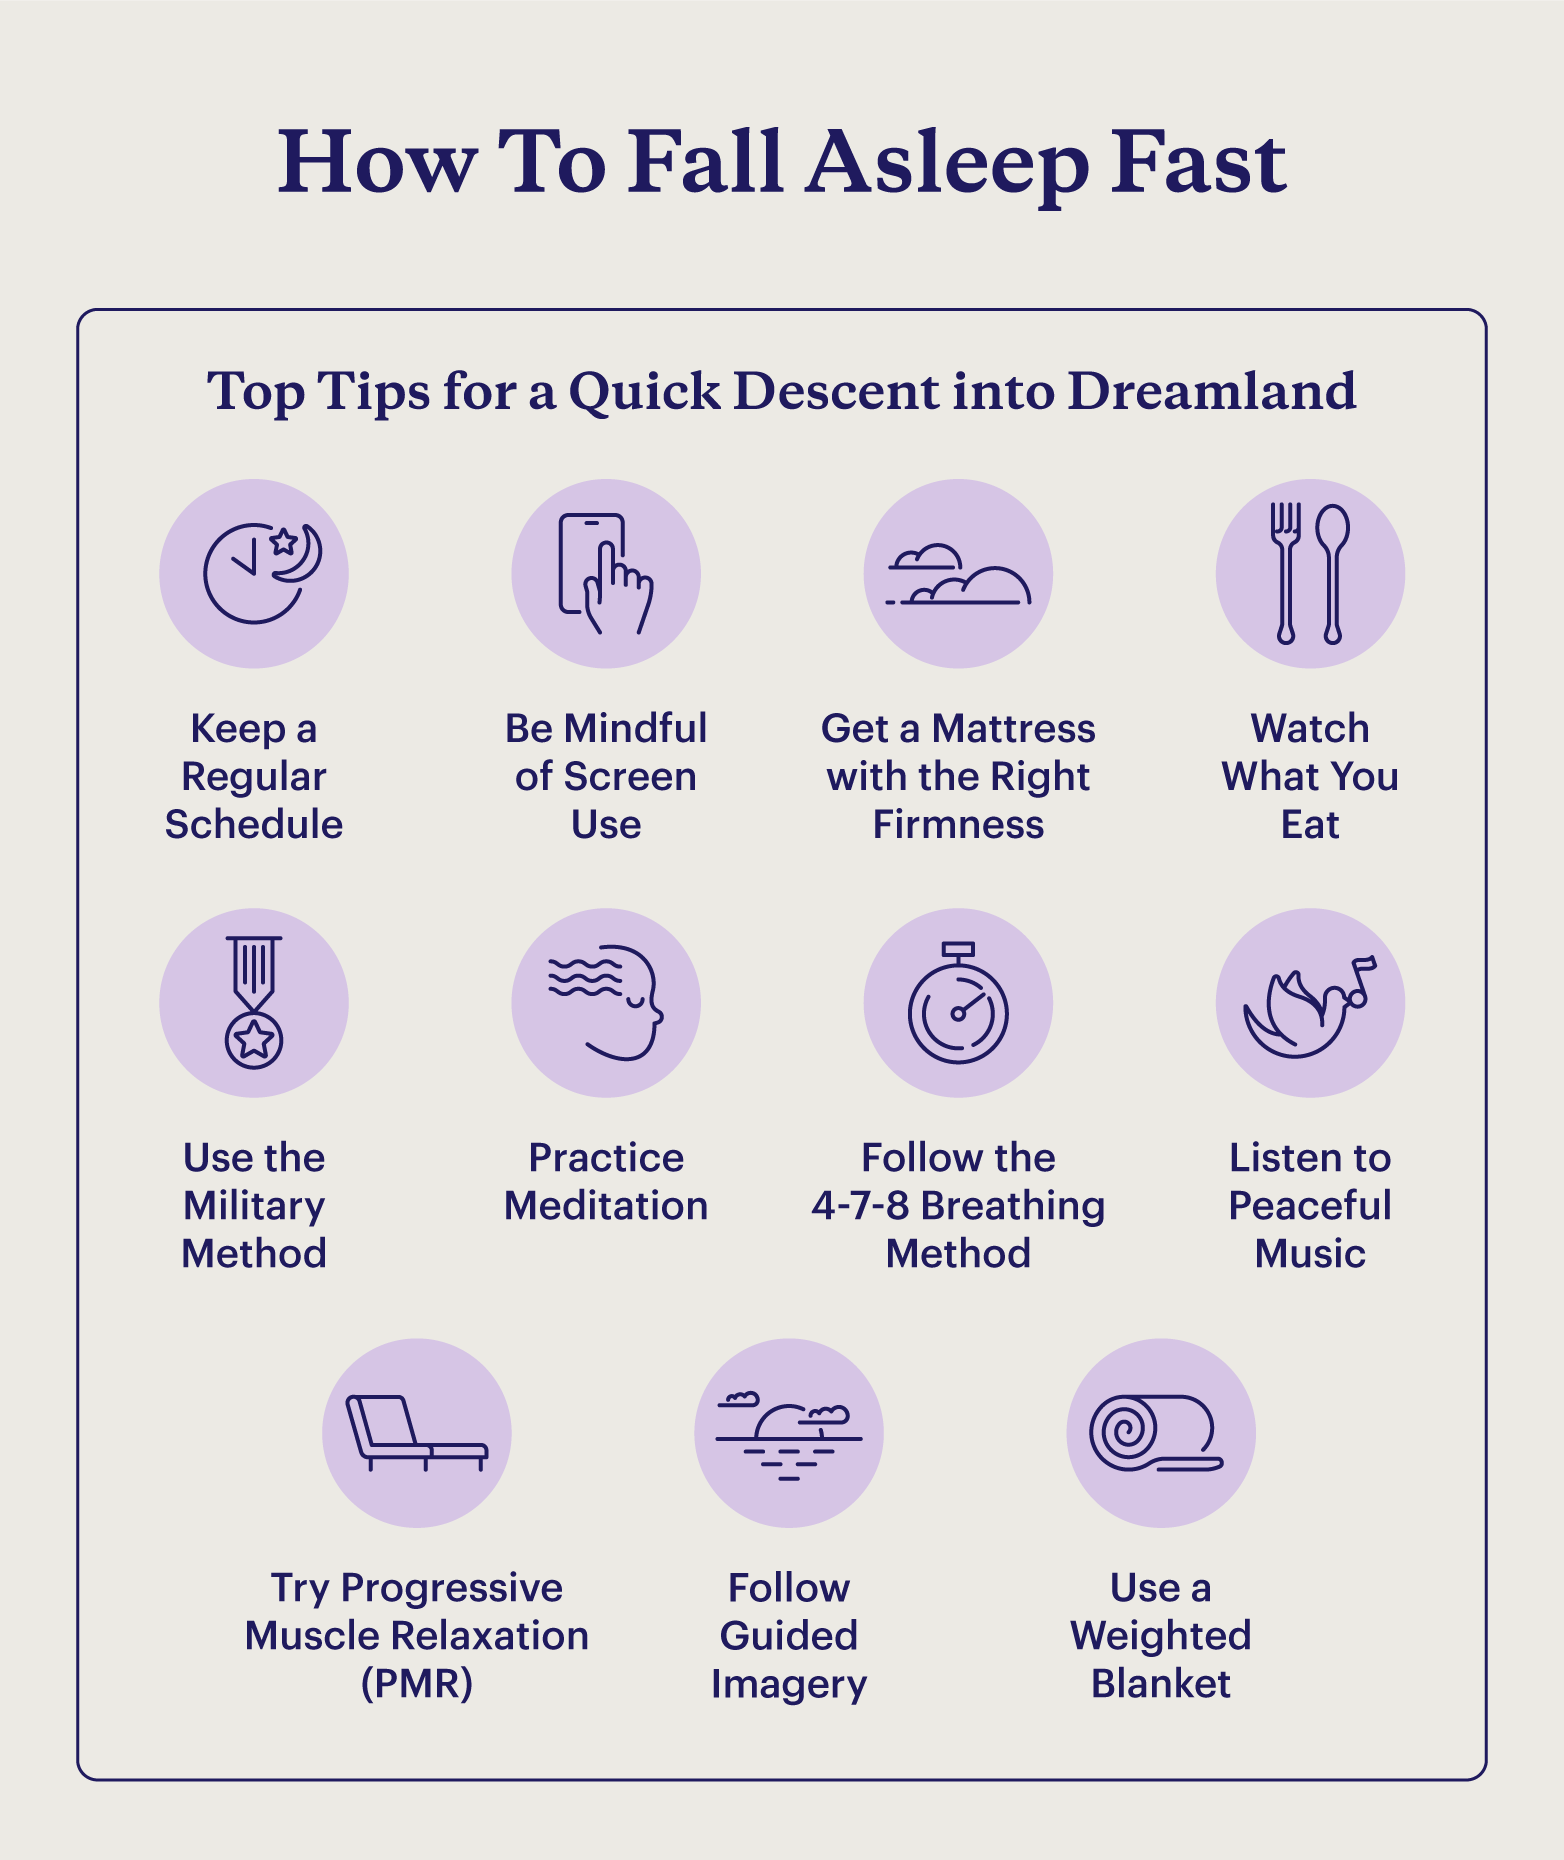 A graphic with icons lists 11 tips for how to fall asleep fast.